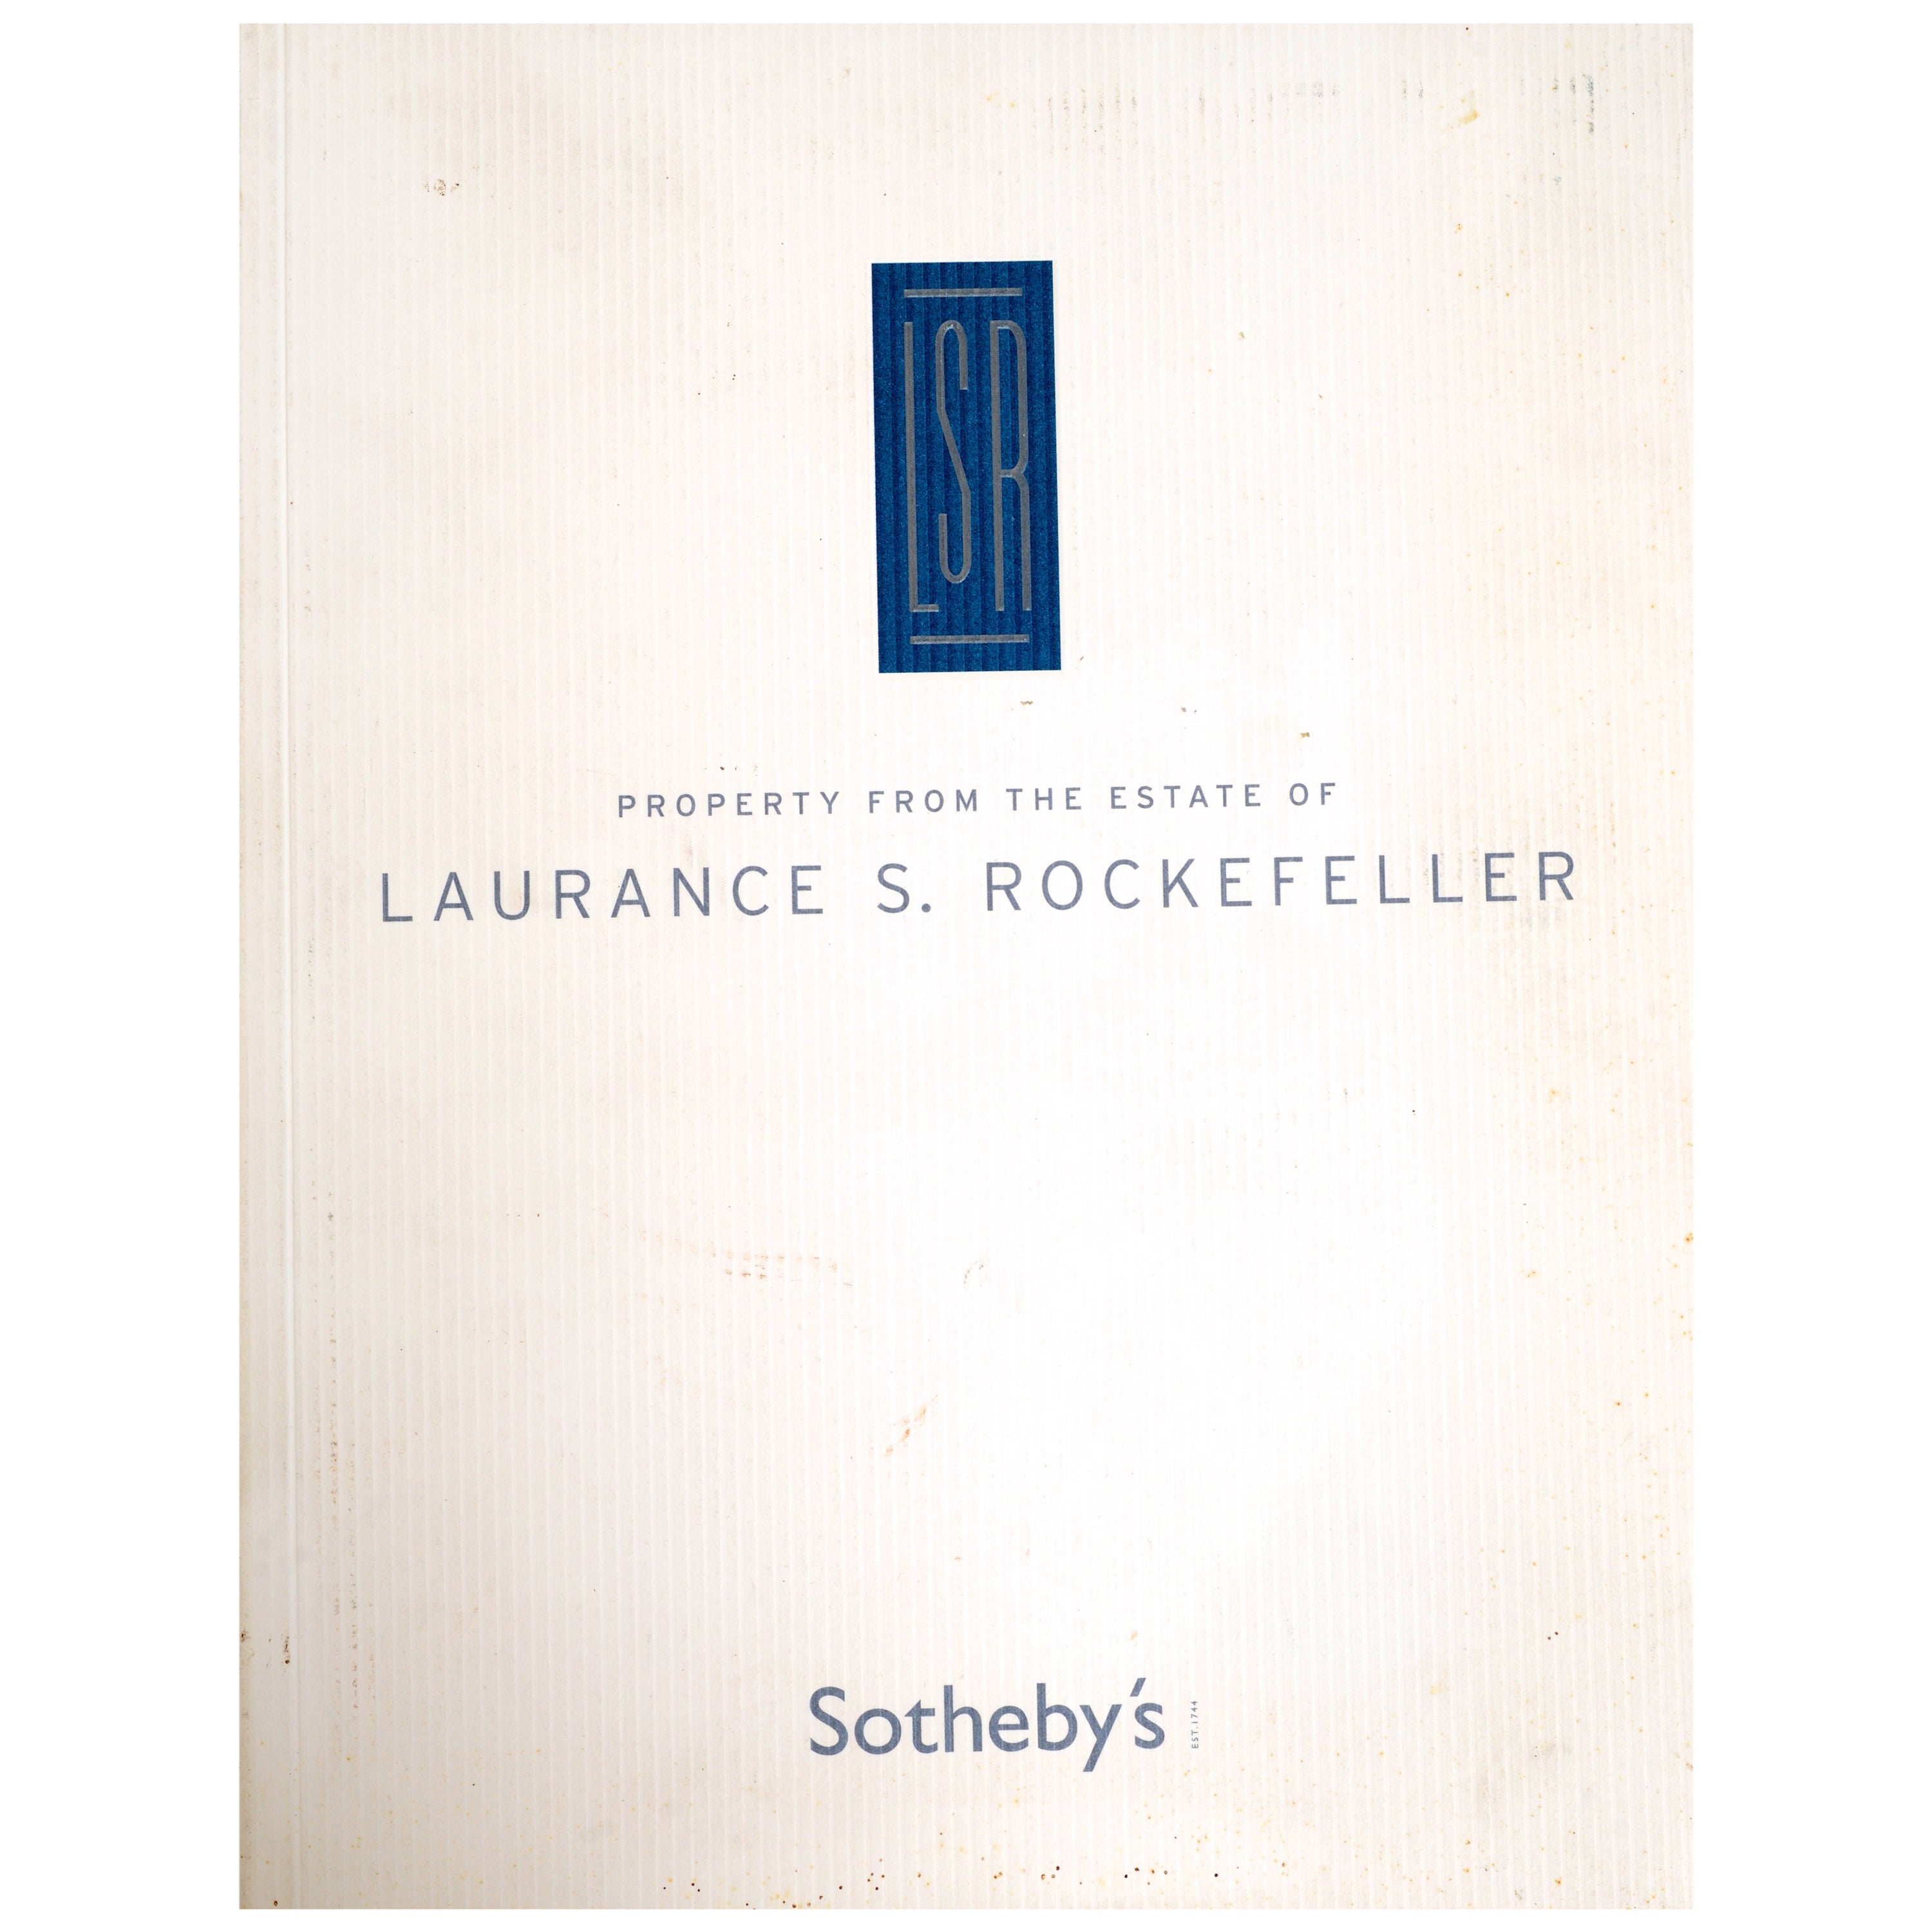 Sotheby's, Property from the Estate of Laurance S. Rockefeller, Oct. 11-12, 2005